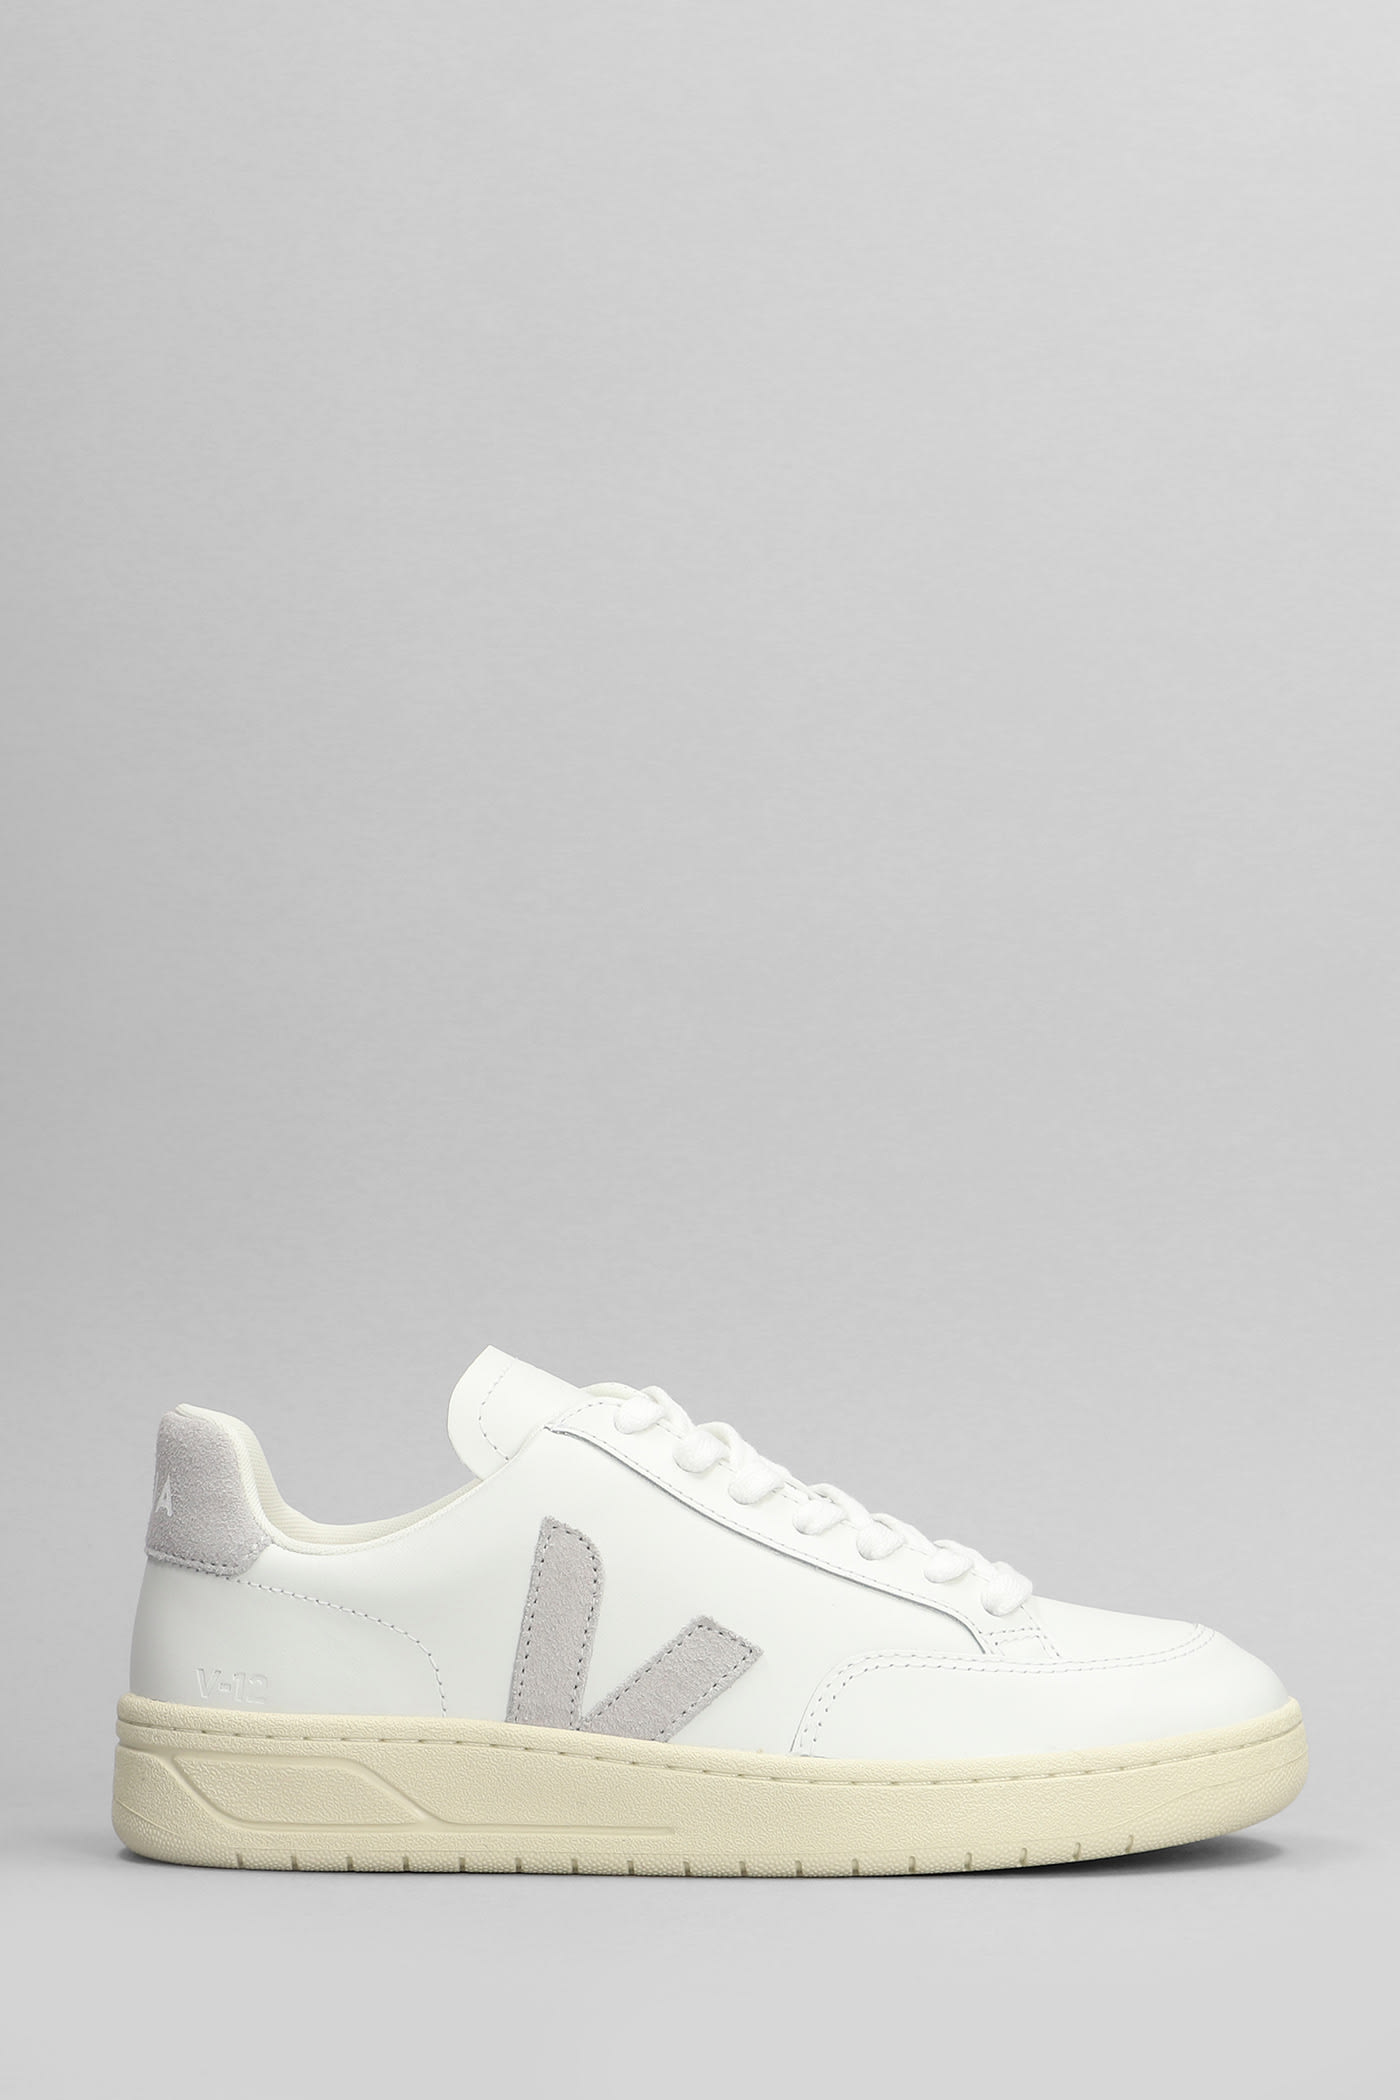 V-12 Sneakers In White Leather